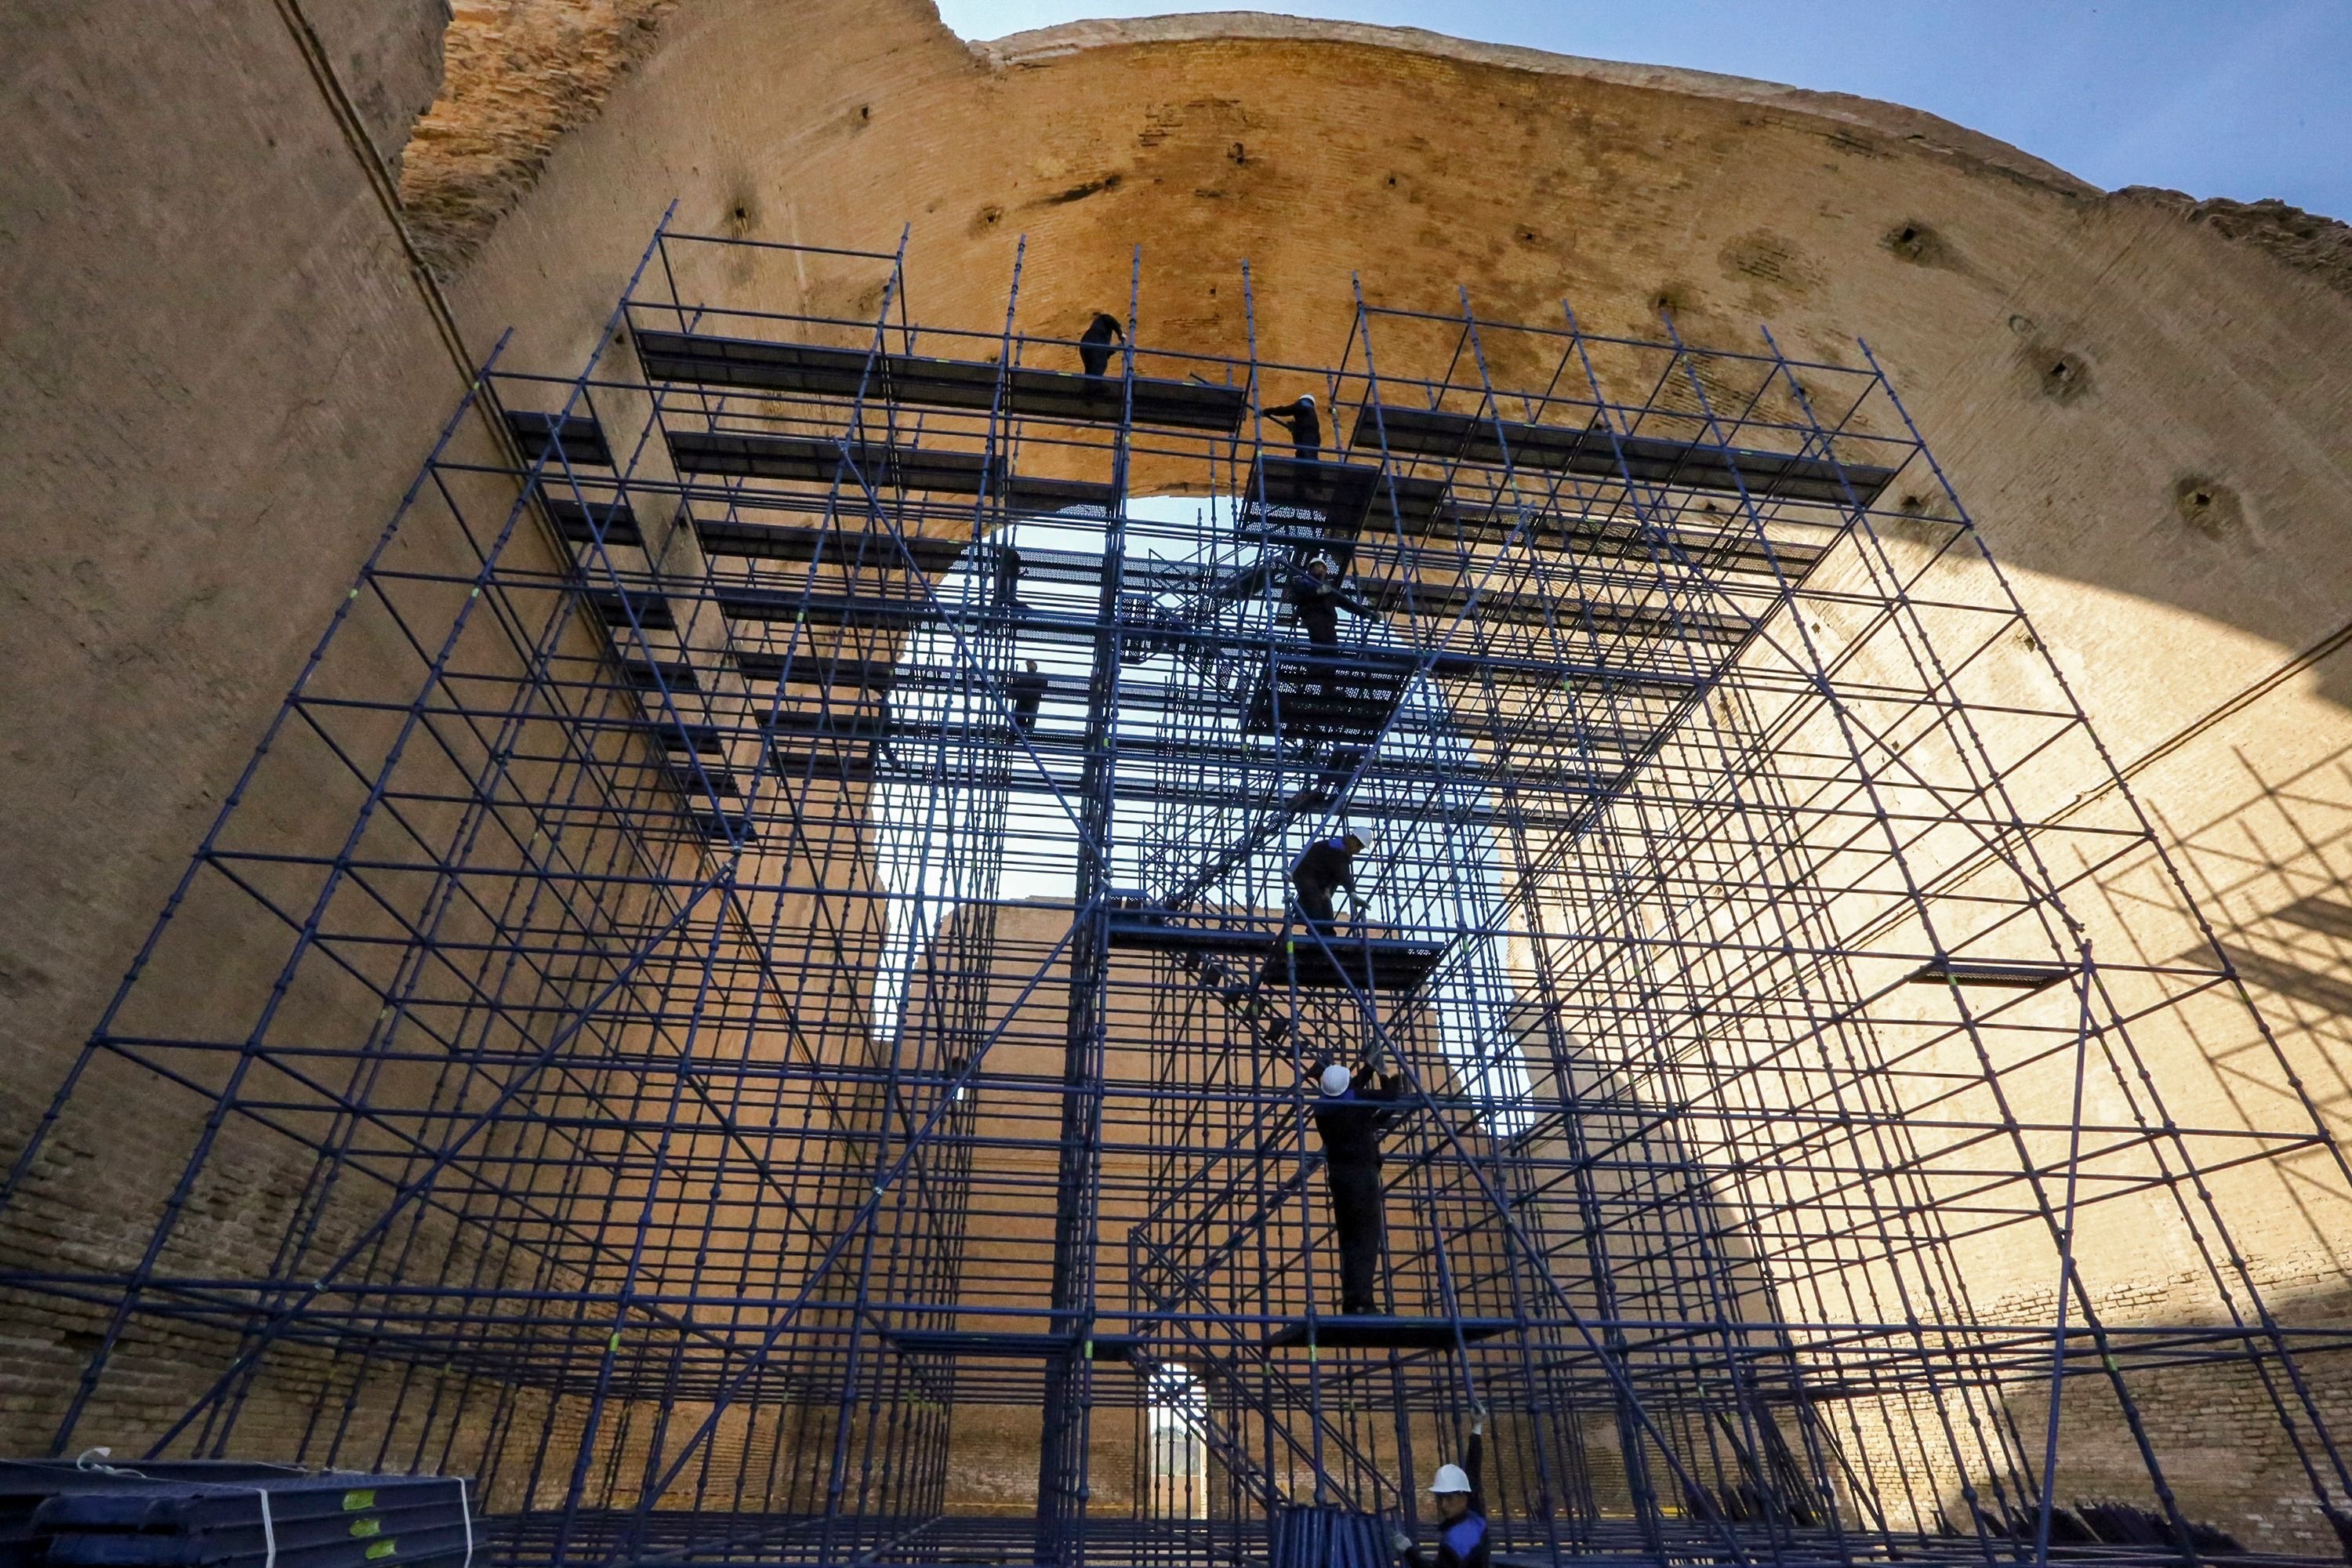 Conservation workers stand along the scaffolding at the Arch of Ctesiphon, also known as Taq Kisra (Khosrow's Arch), at the ancient site of Ctesiphon near al-Madain, central Iraq, Nov. 24, 2021. (AFP Photo)